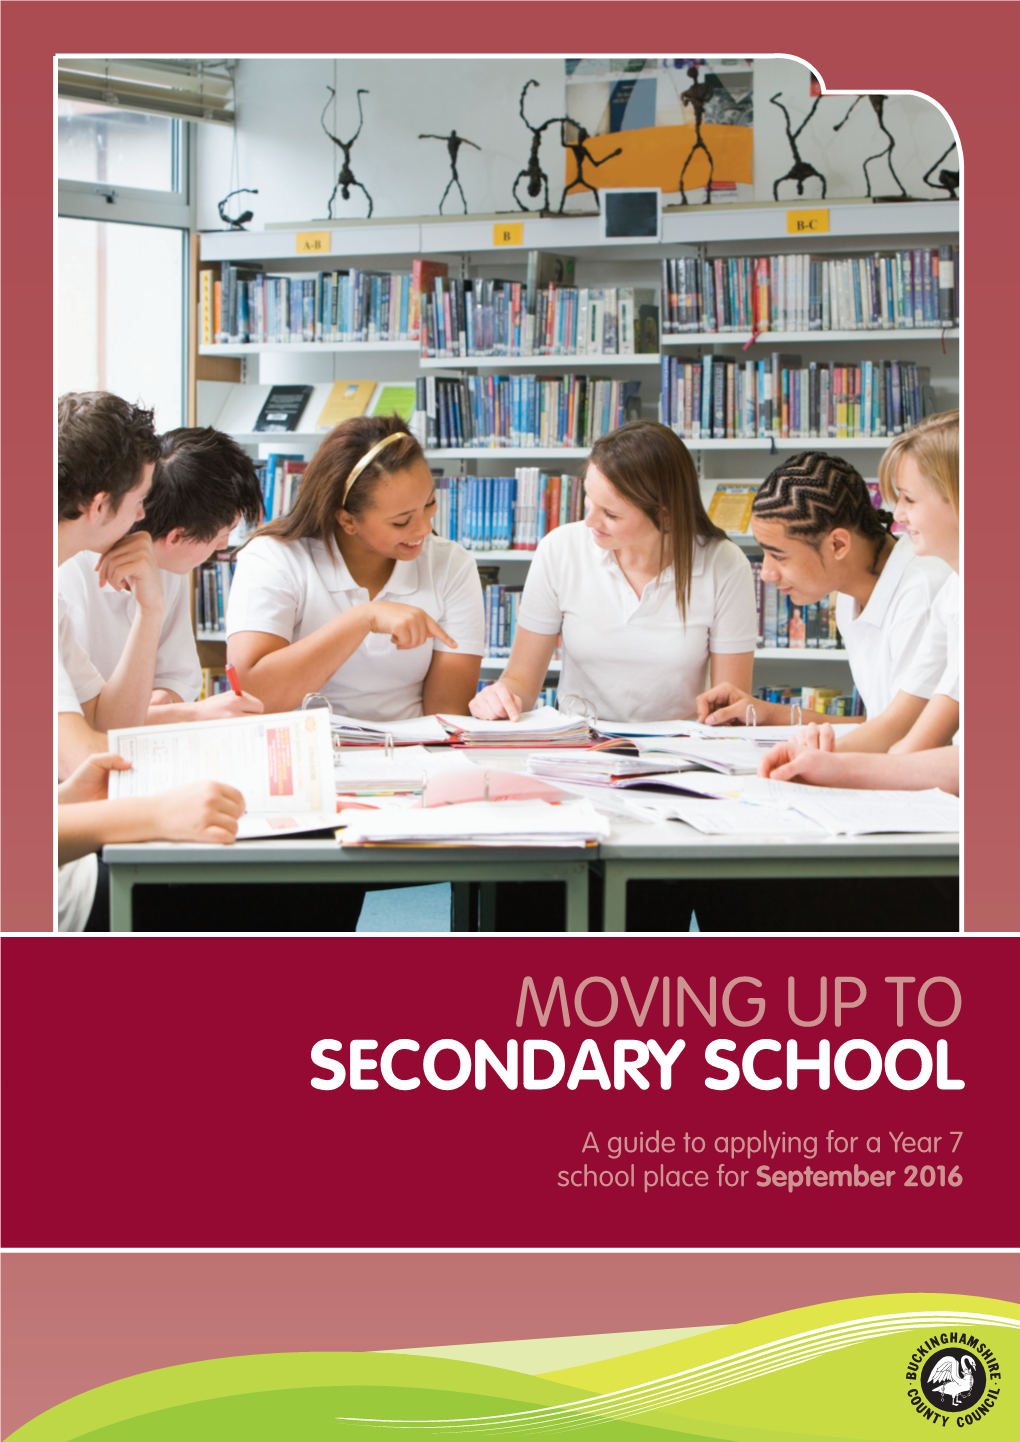 MOVING up to SECONDARY SCHOOL a Guide to Applying for a Year 7 School Place for September 2016